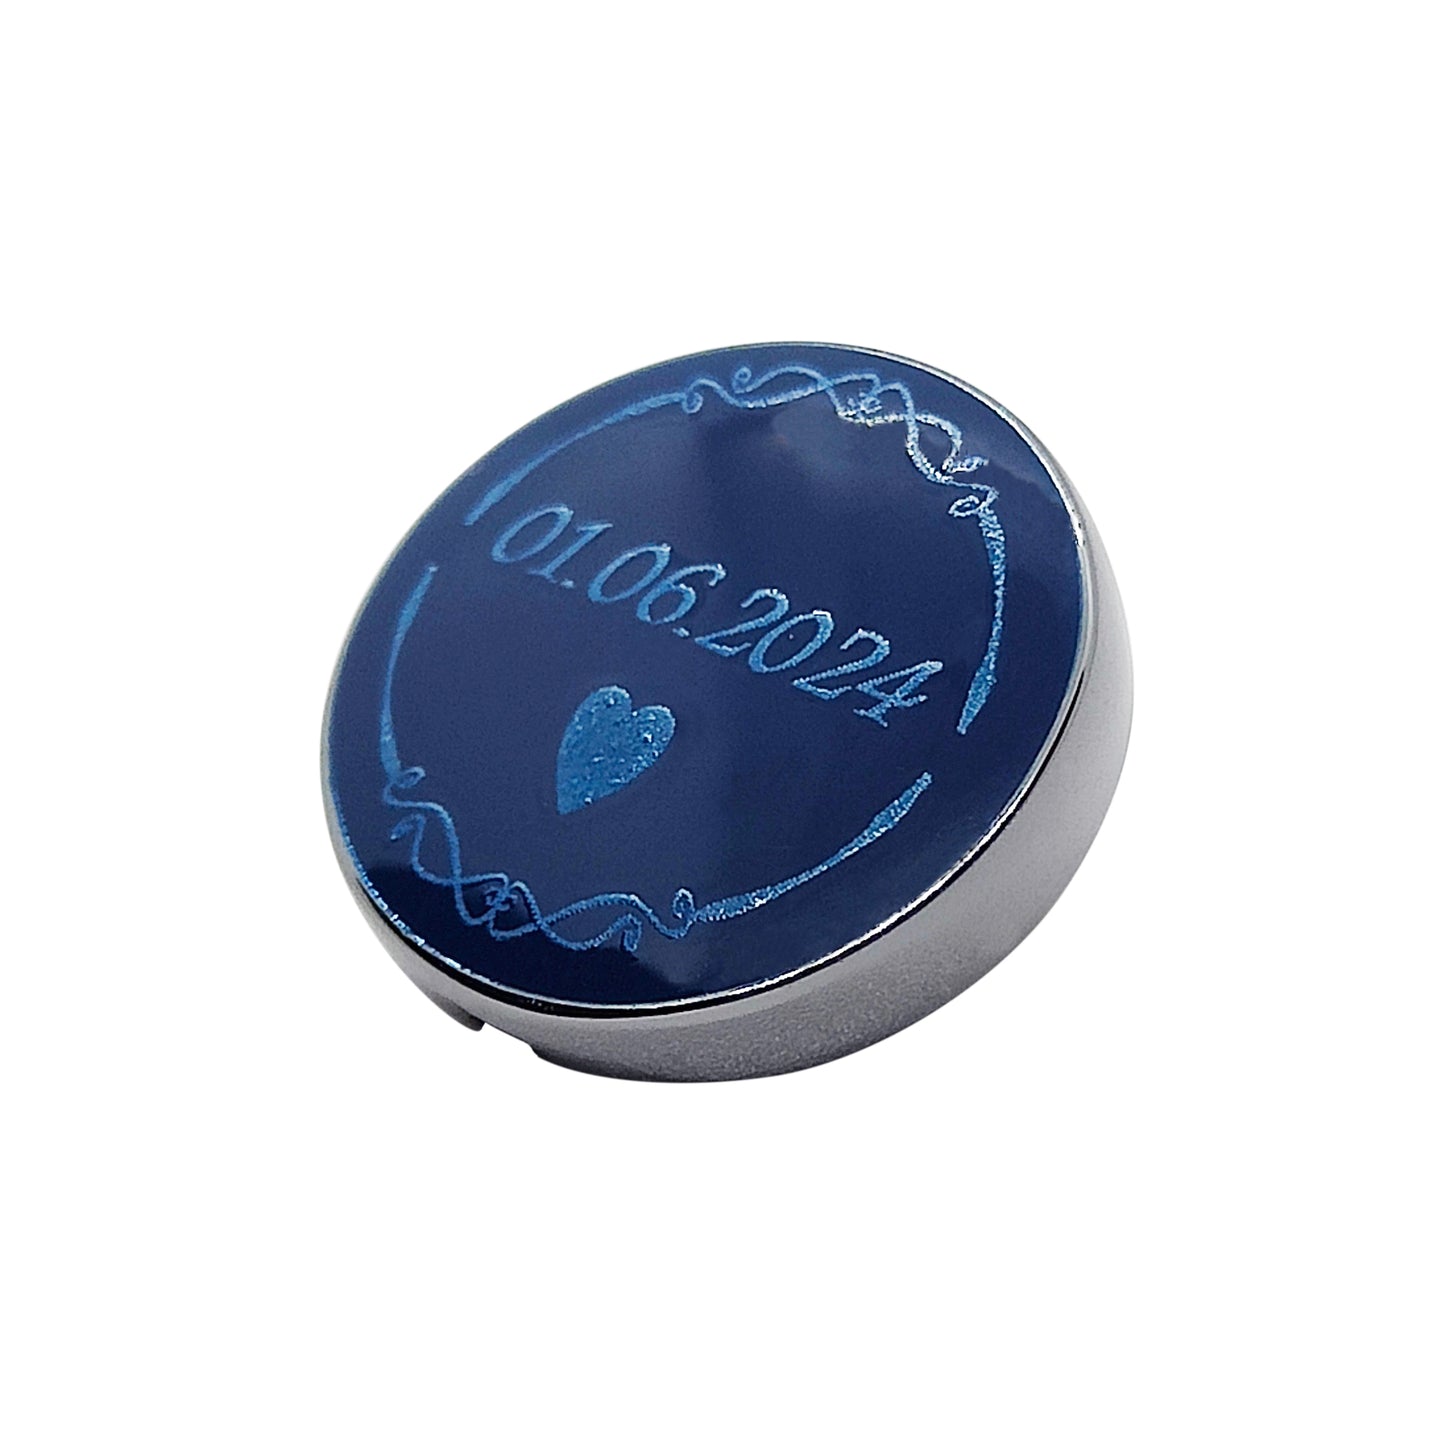 21mm button in carbon metal and customizable navy blue enamel